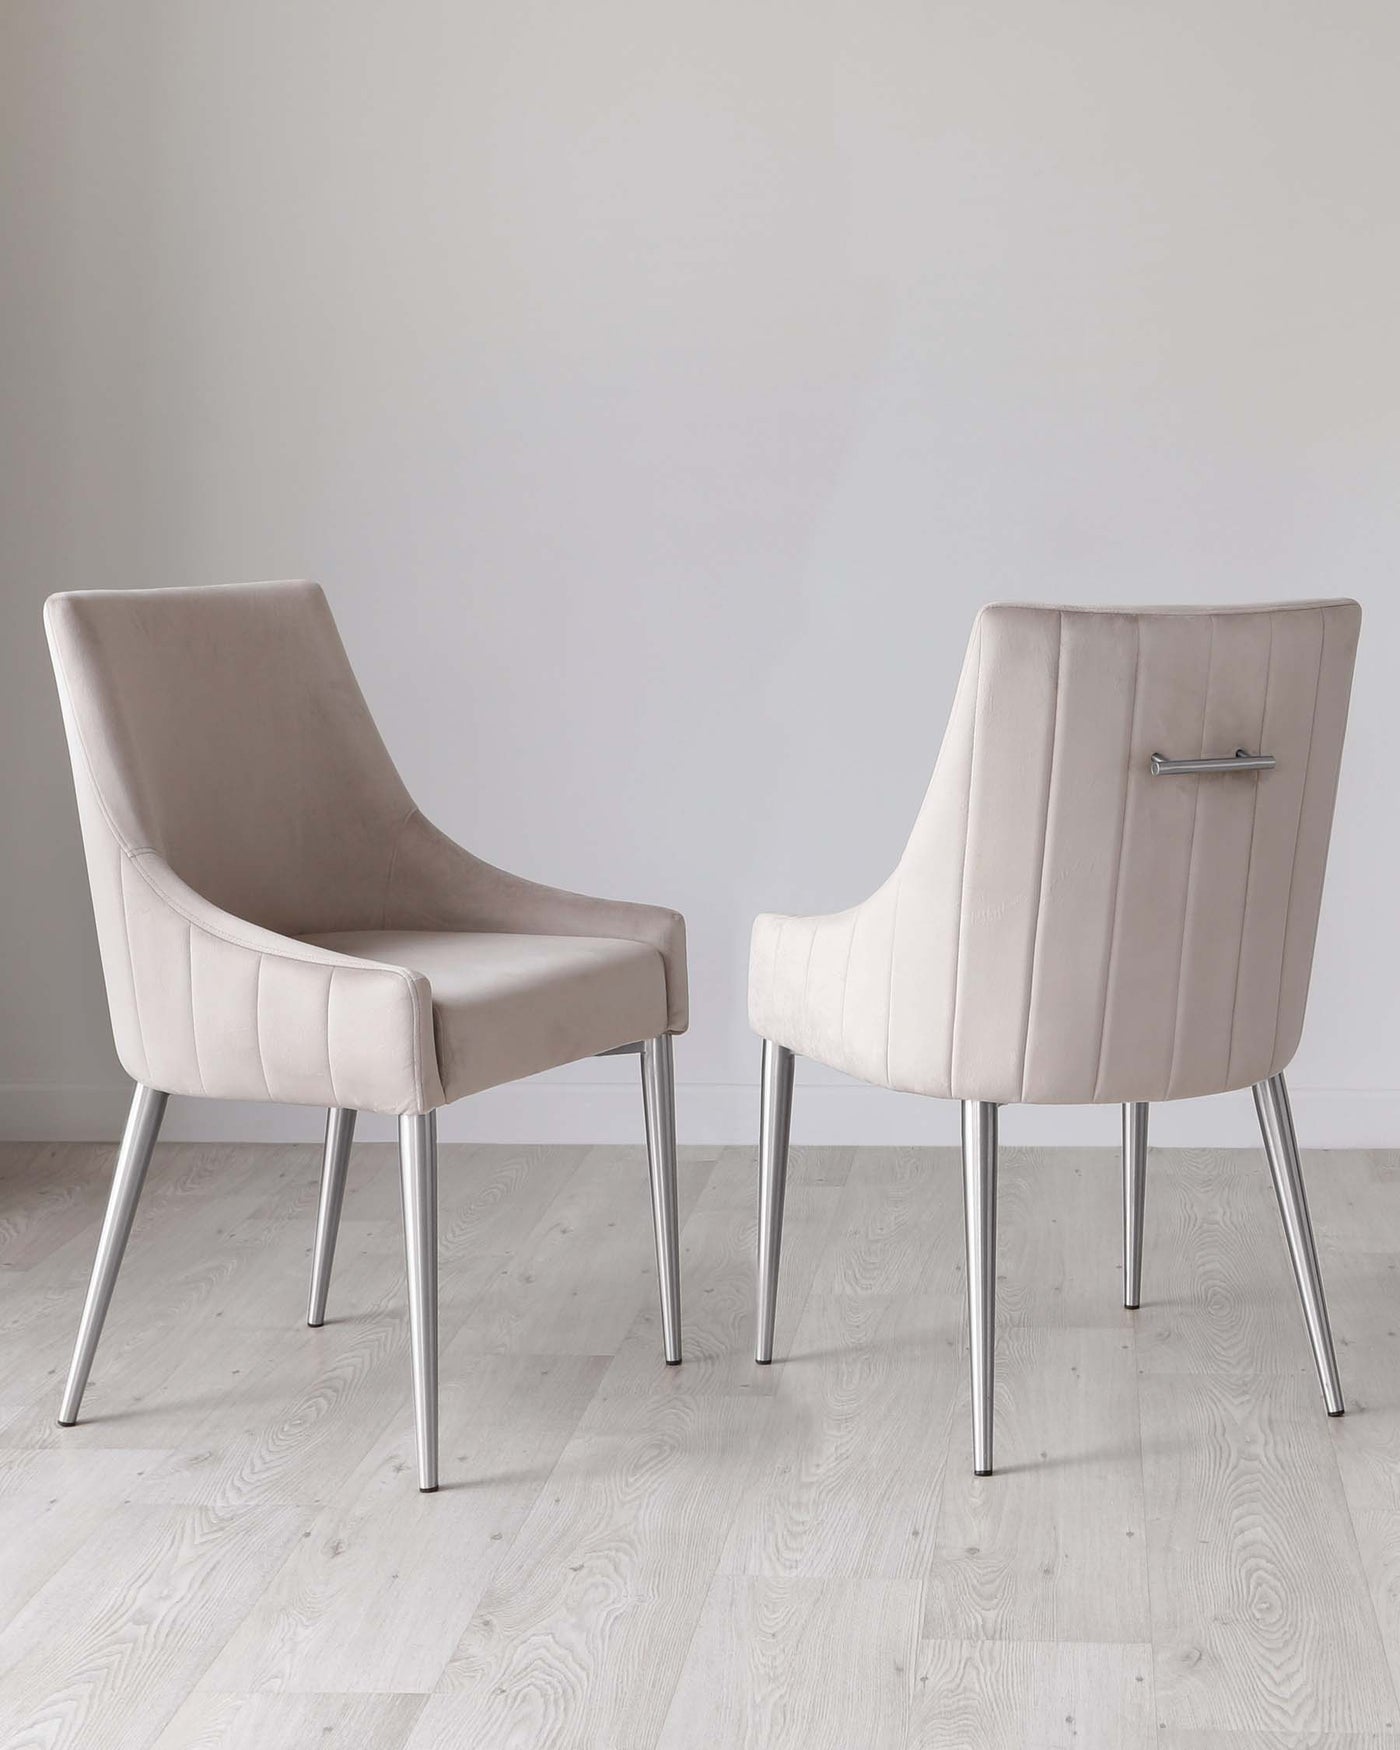 Two modern upholstered dining chairs with sleek, silver metal legs, featuring a gently curved backrest and comfortable seat cushion in an elegant light taupe fabric. The design includes subtle horizontal stitching on the backrest, adding a touch of sophistication. Chairs are positioned on a light hardwood floor against a plain white background.